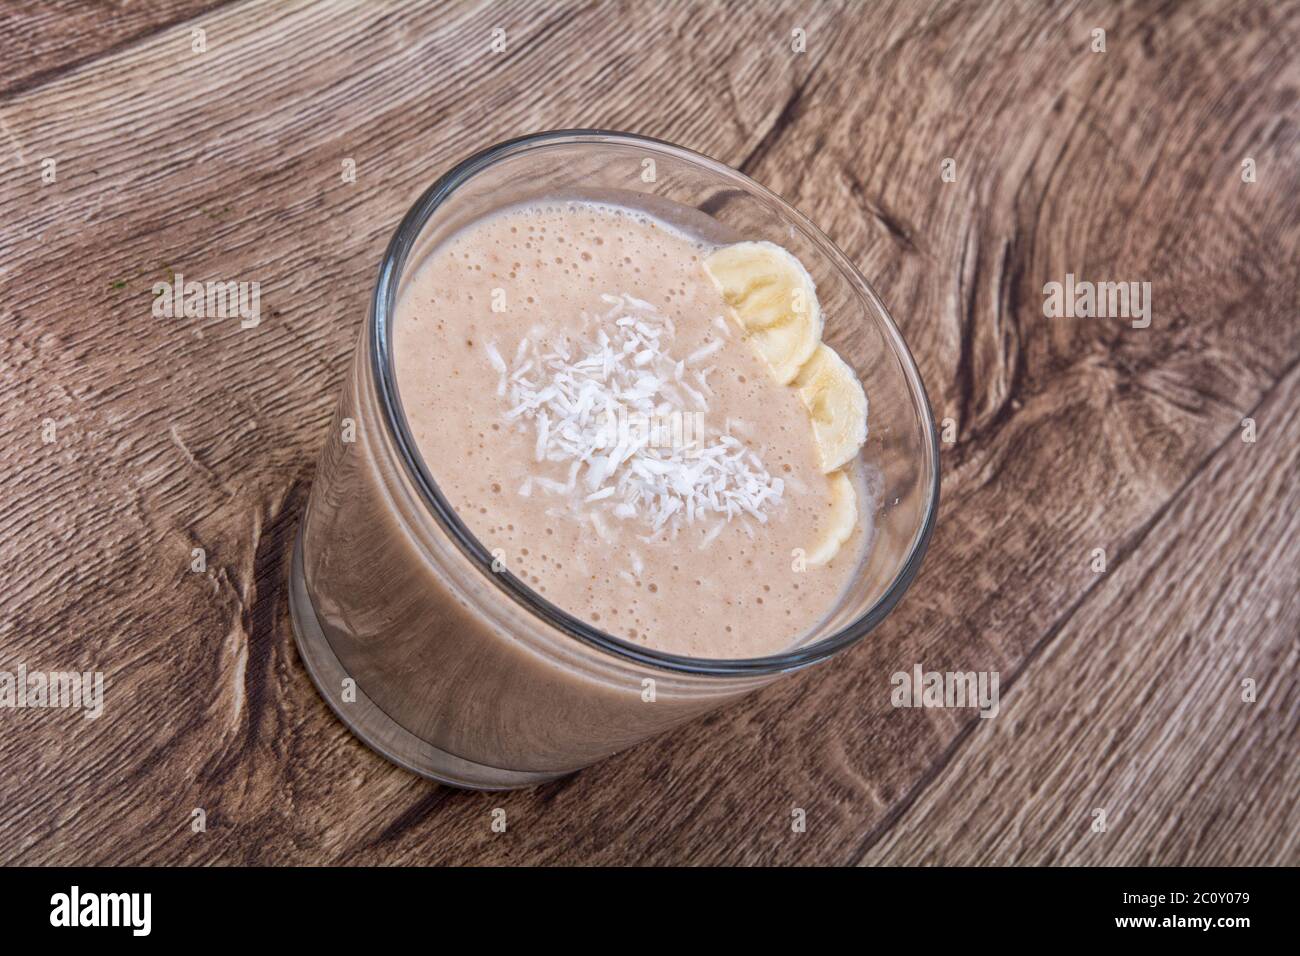 Chocolate drink with coconut and banana Stock Photo